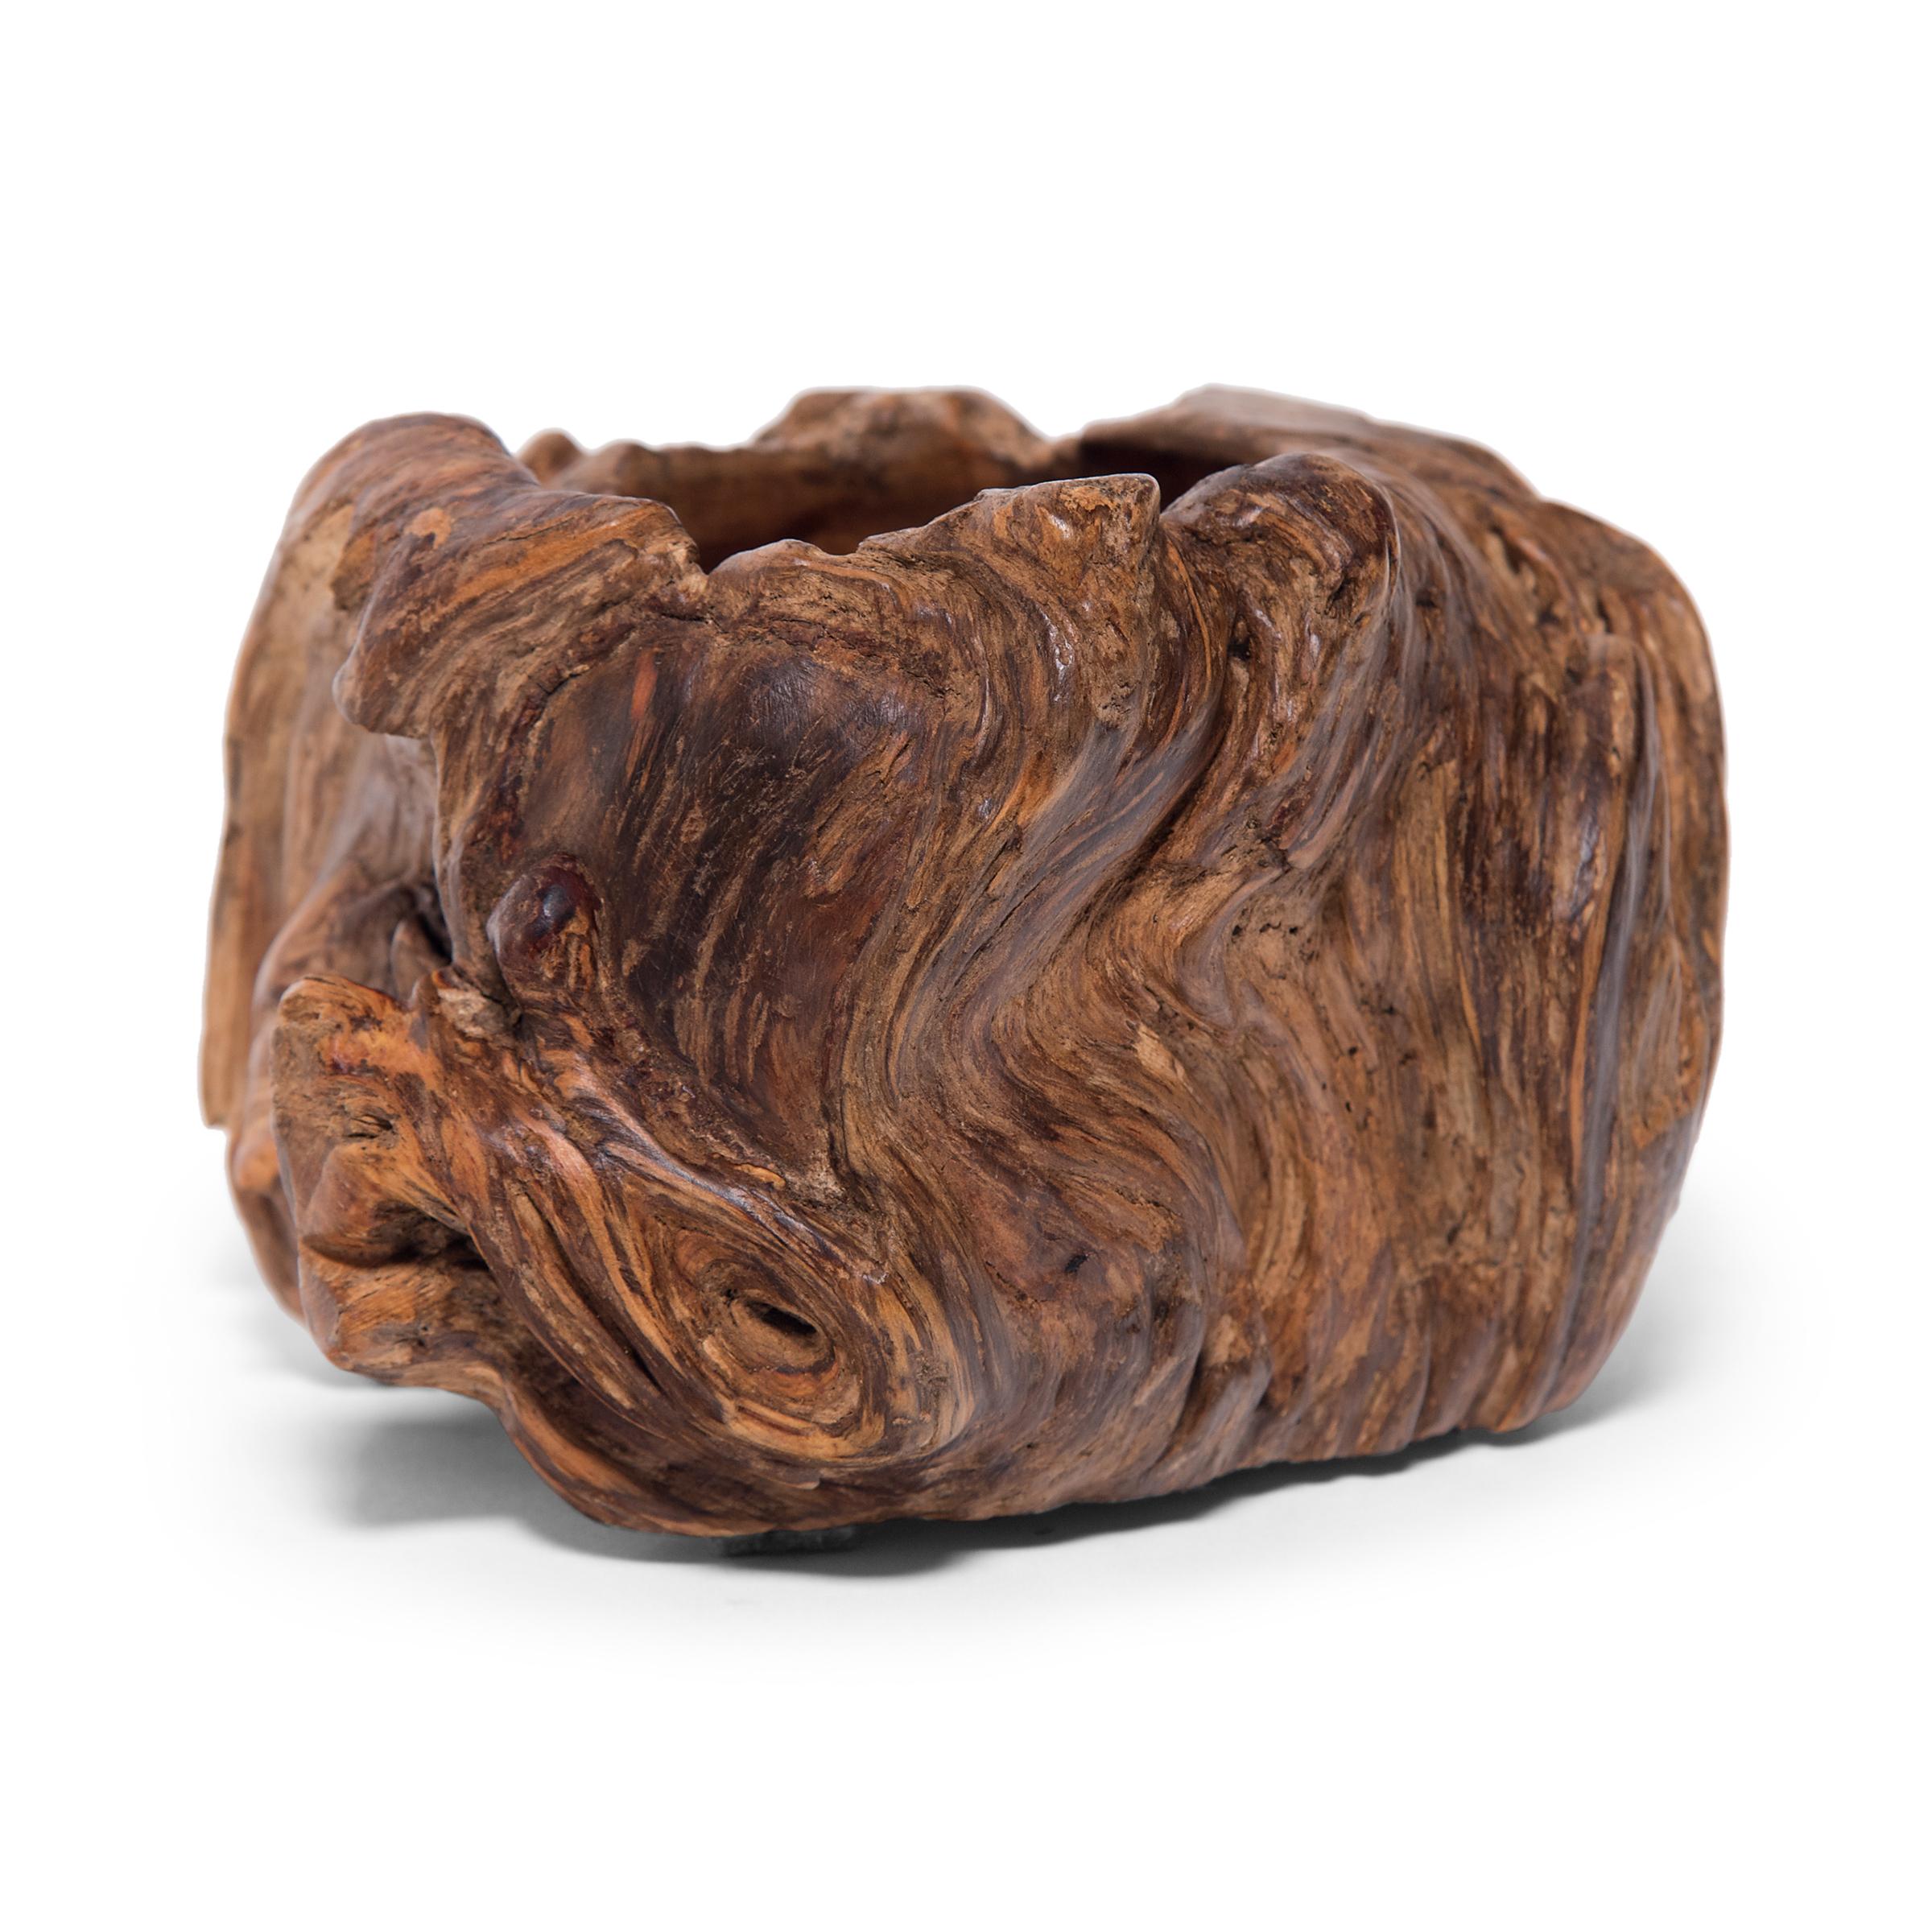 Hand carved from a cypress tree burl, this late 19th century burl wood bowl was once used by a Qing-dynasty scholar to rinse the ink from his calligraphy brush. Placed alongside the Four Treasures of the scholar - paper, brush, ink, and inkstone -